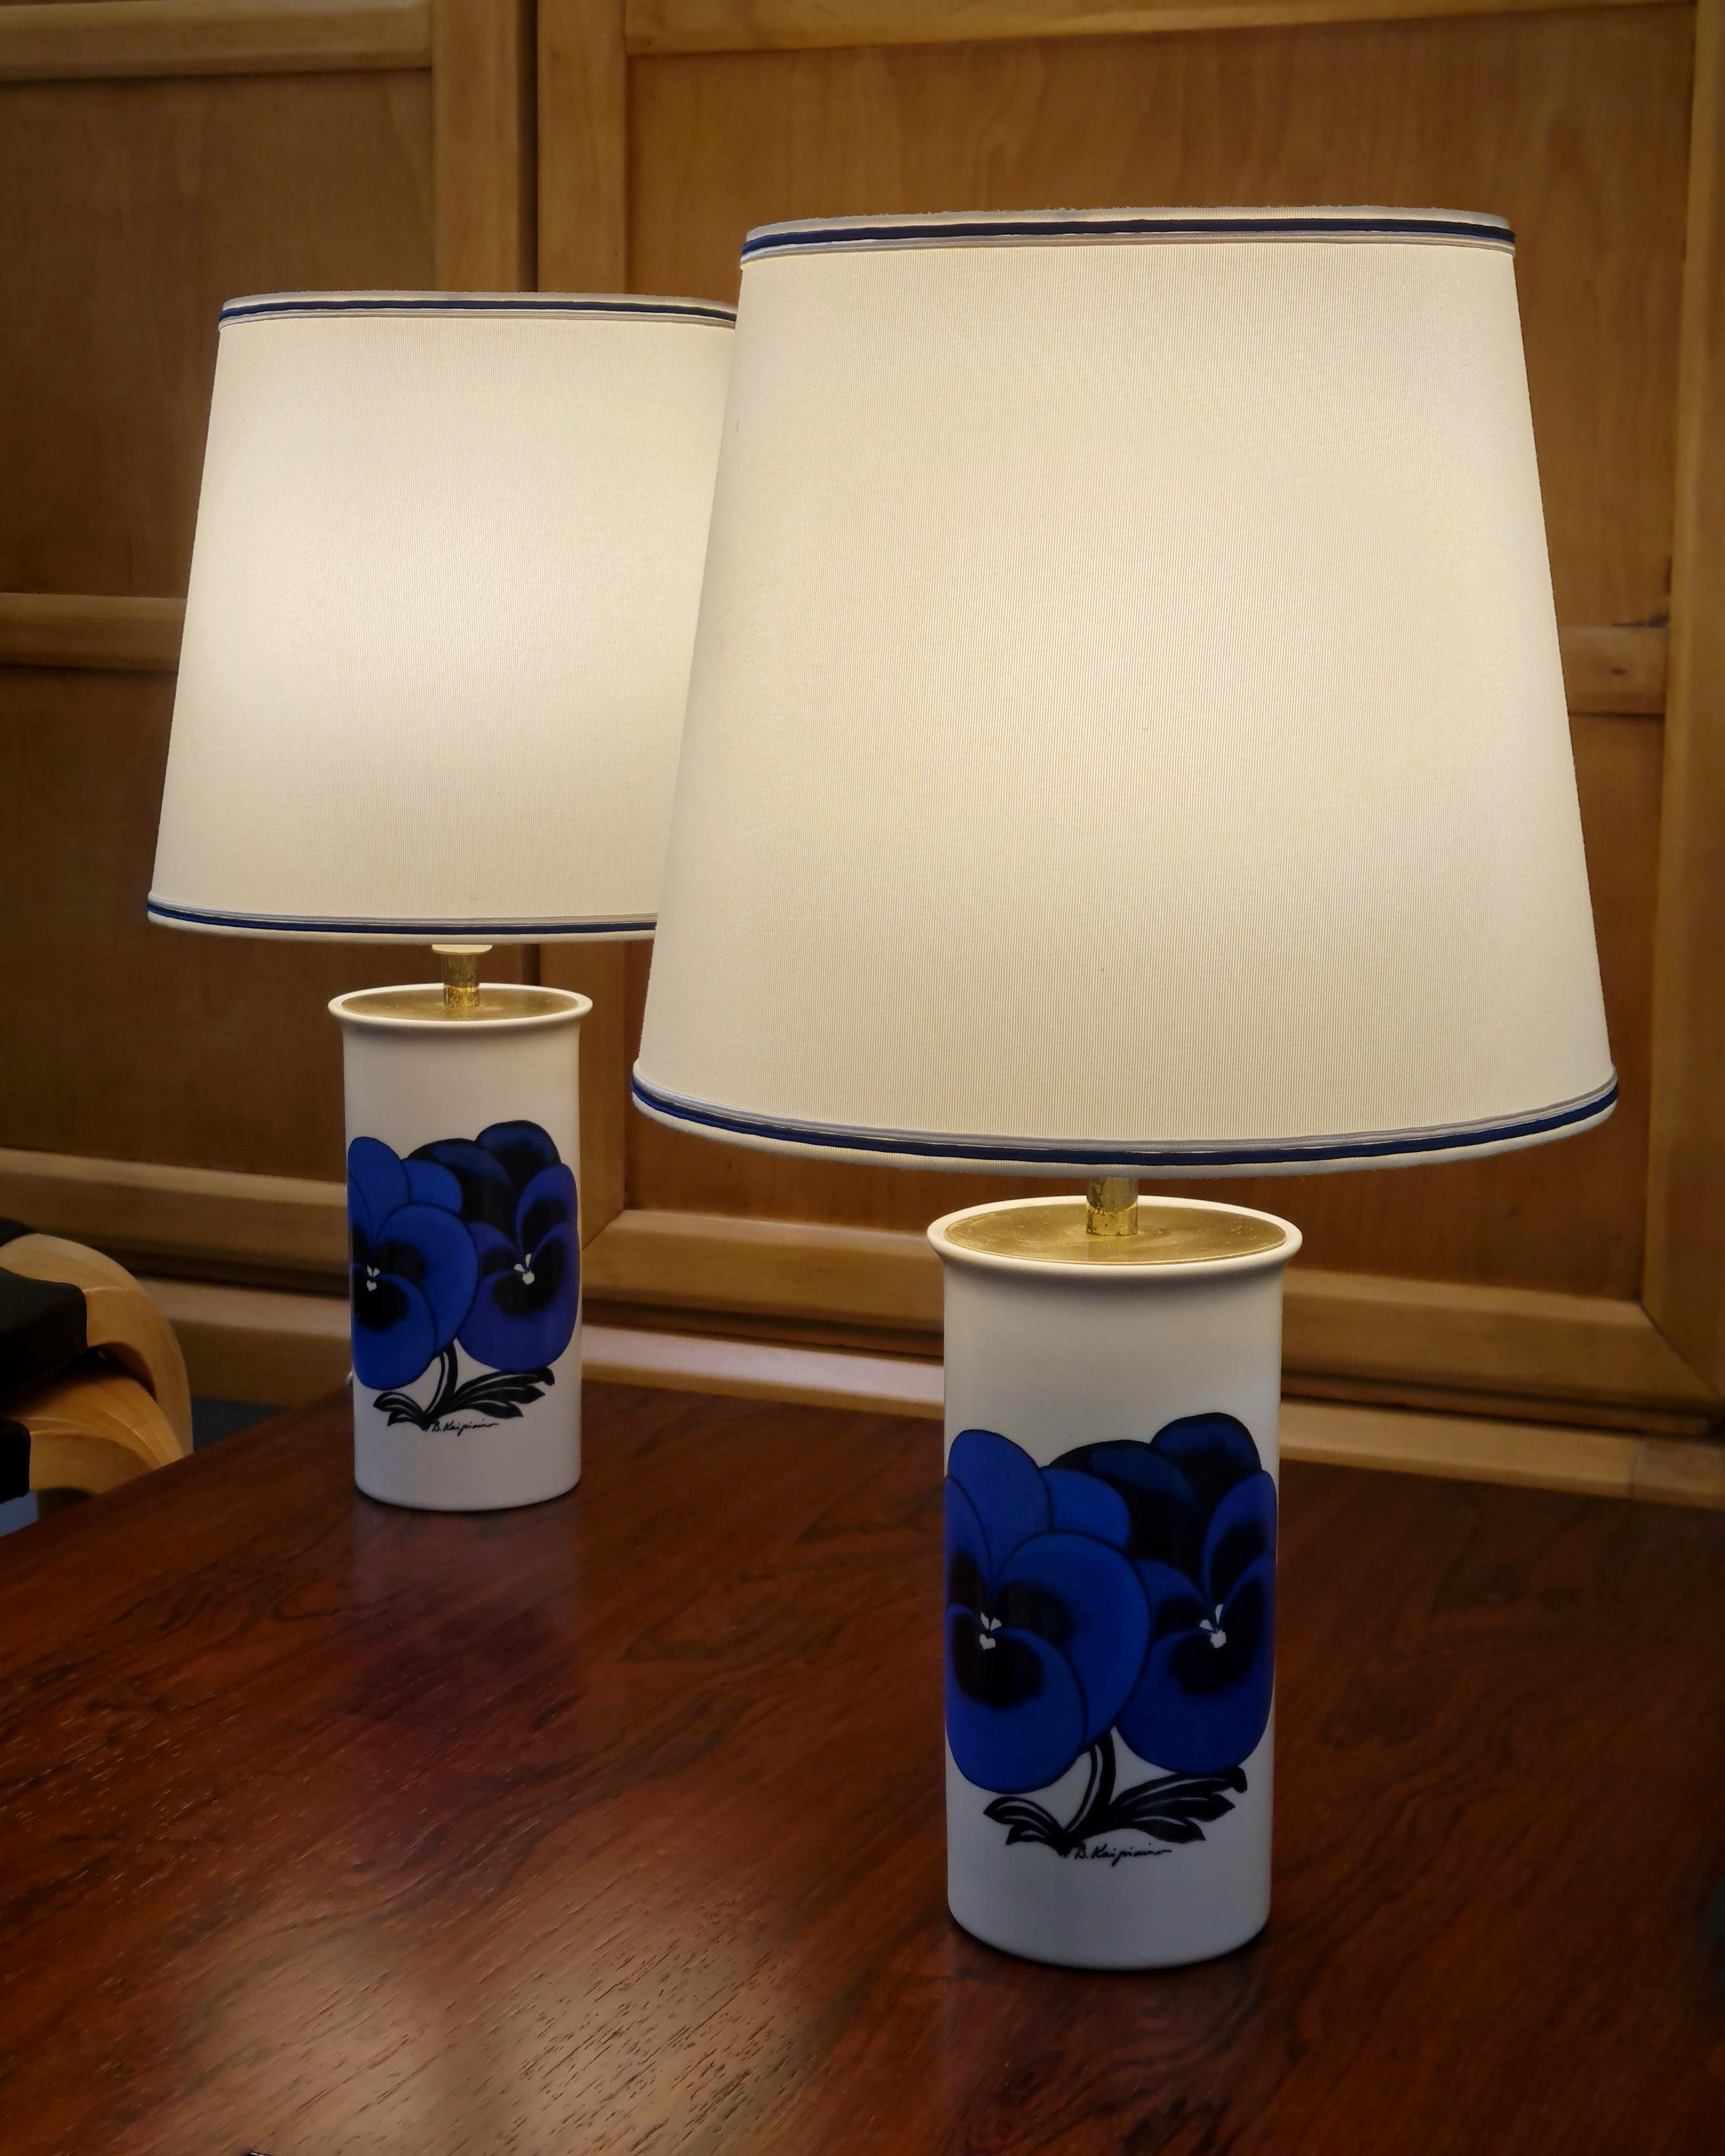 A pair of limited edition table lamps designed by Birger Kaipiainen for the Stockmann 120 year anniversary in 1982. Manufactured by Arabia OY in Finland. A very nice pair in impeccable original condition. Only 150 pieces of these lamps were ever